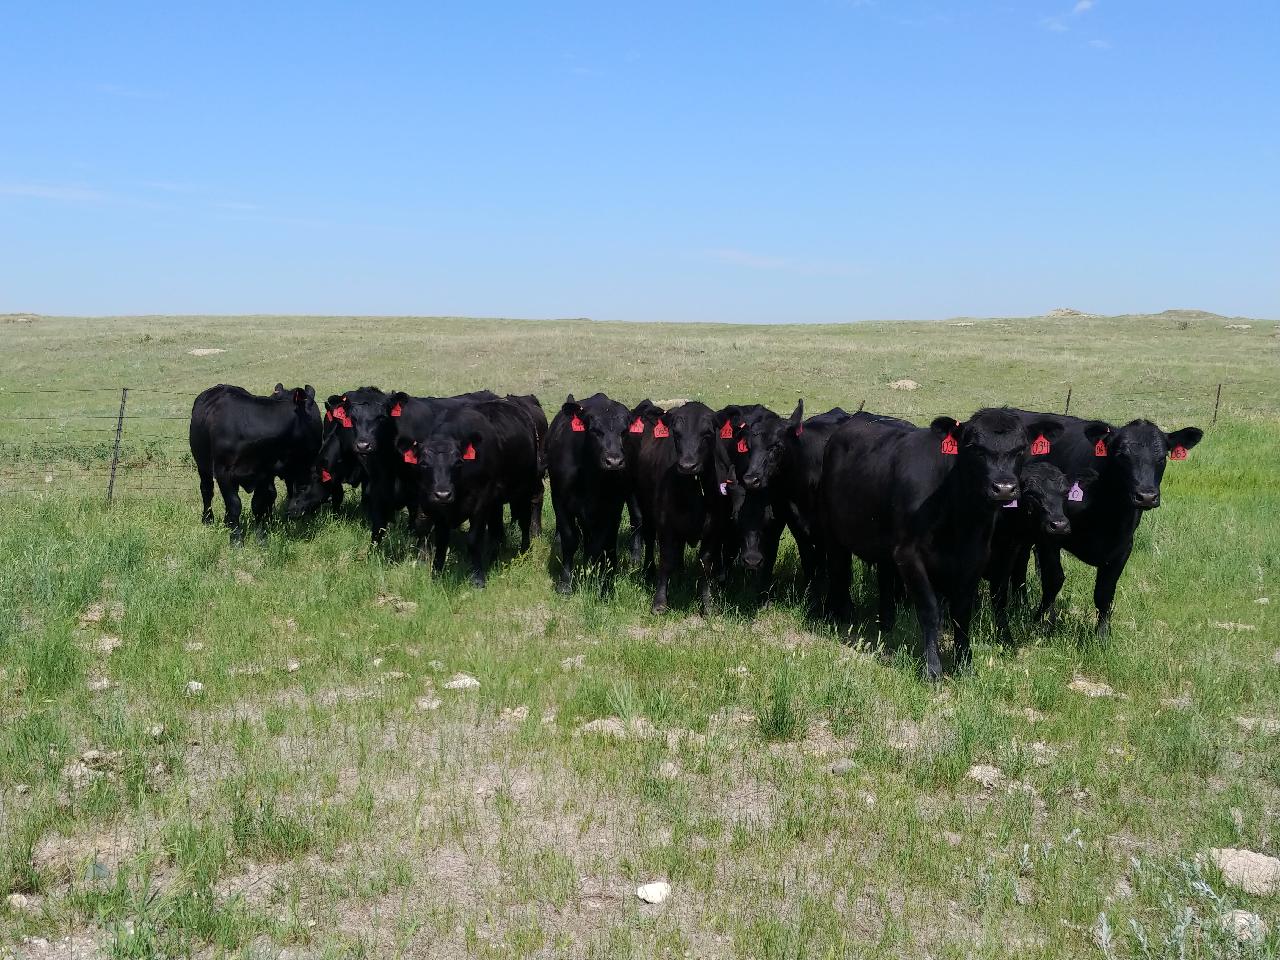 Drought continues to be a concern for many North Dakota ranchers. (NDSU photo)